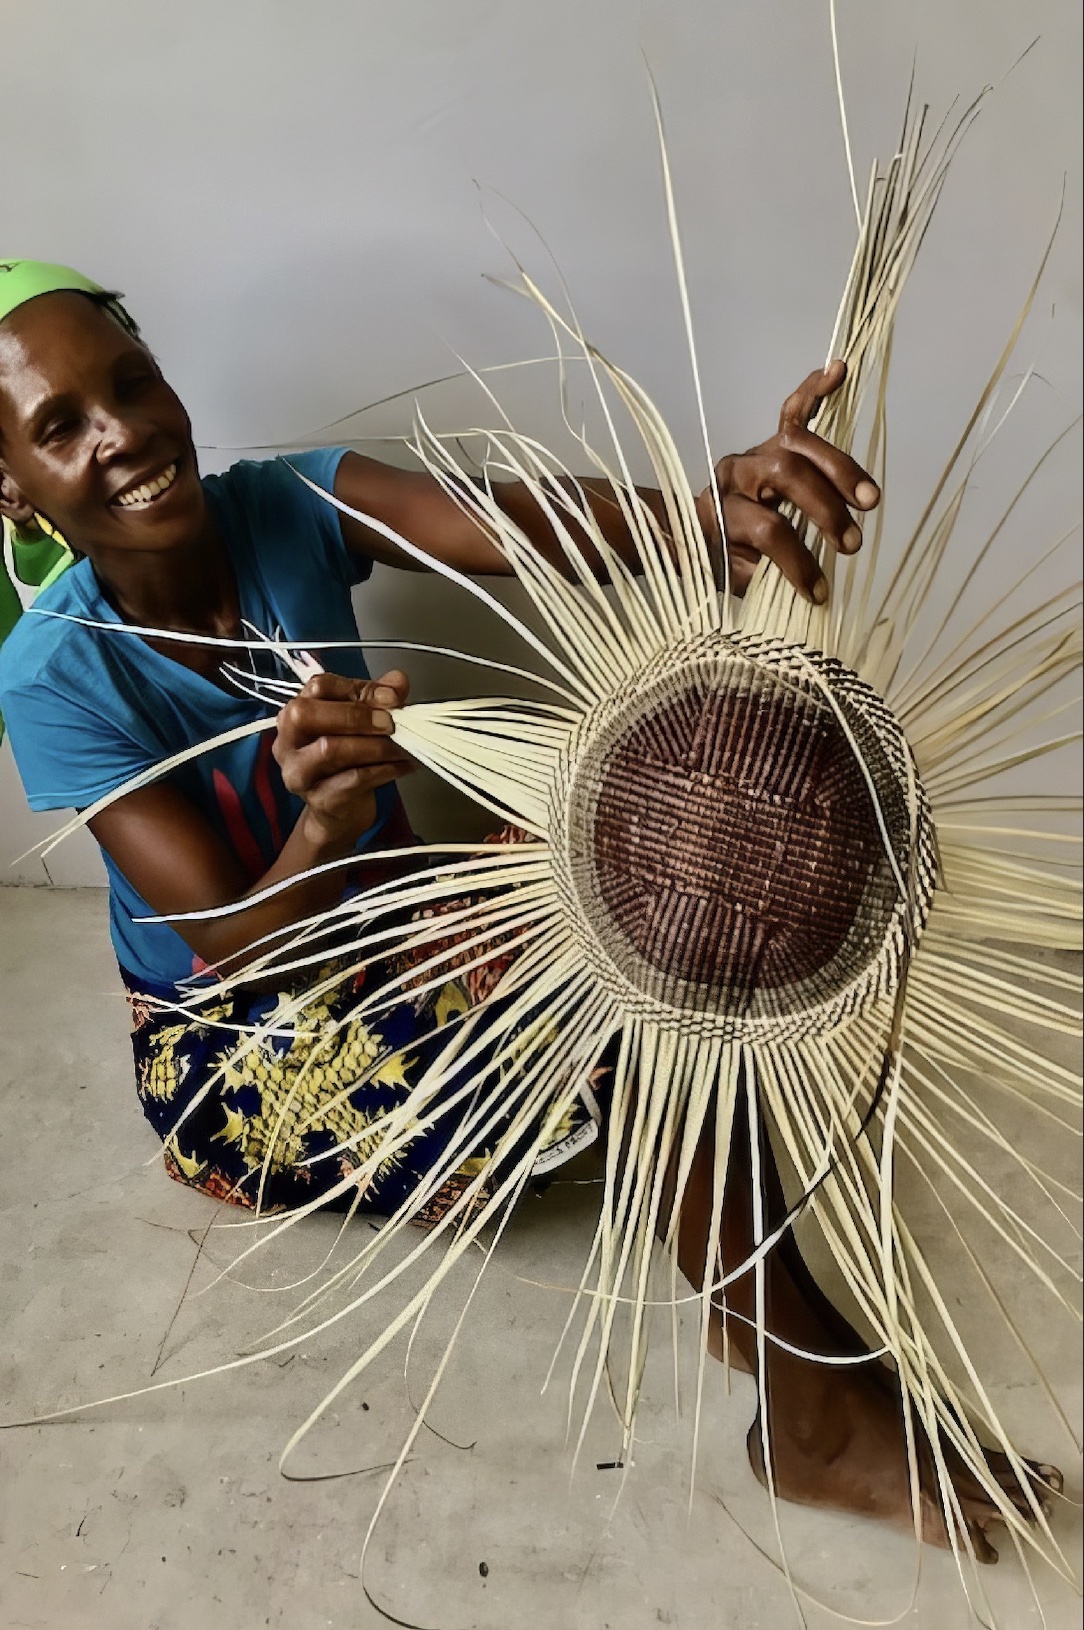 A San woman sits on the floor and shows a basket she is working on. It's at an early stage and looks much like a sunflower.